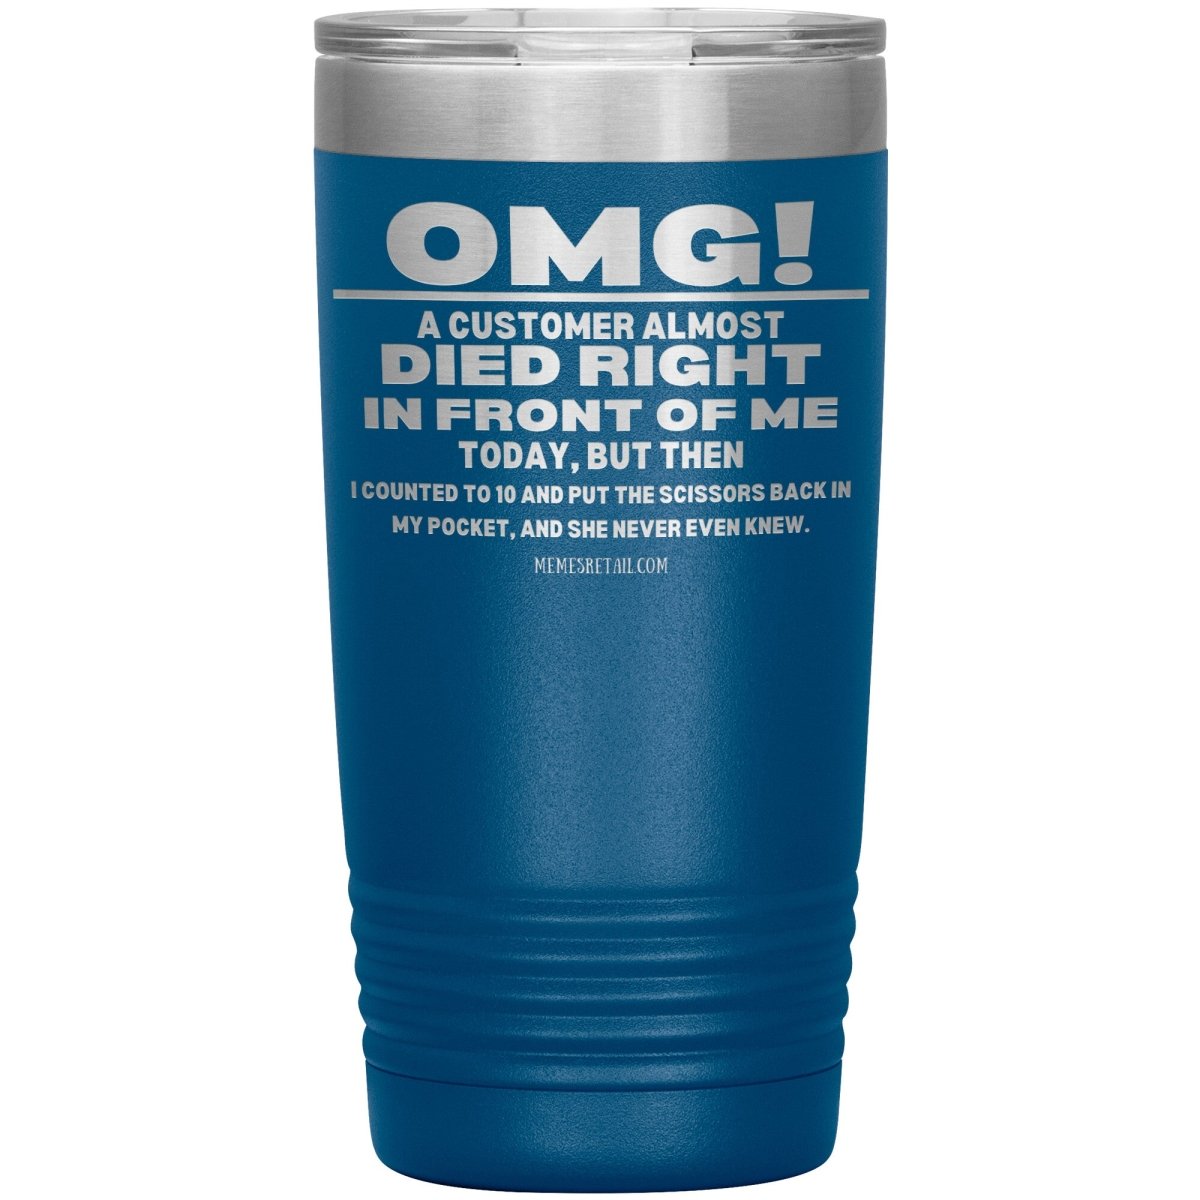 OMG! A Customer Almost Died Right In Front Of Me Tumbler, 20oz Insulated Tumbler / Blue - MemesRetail.com